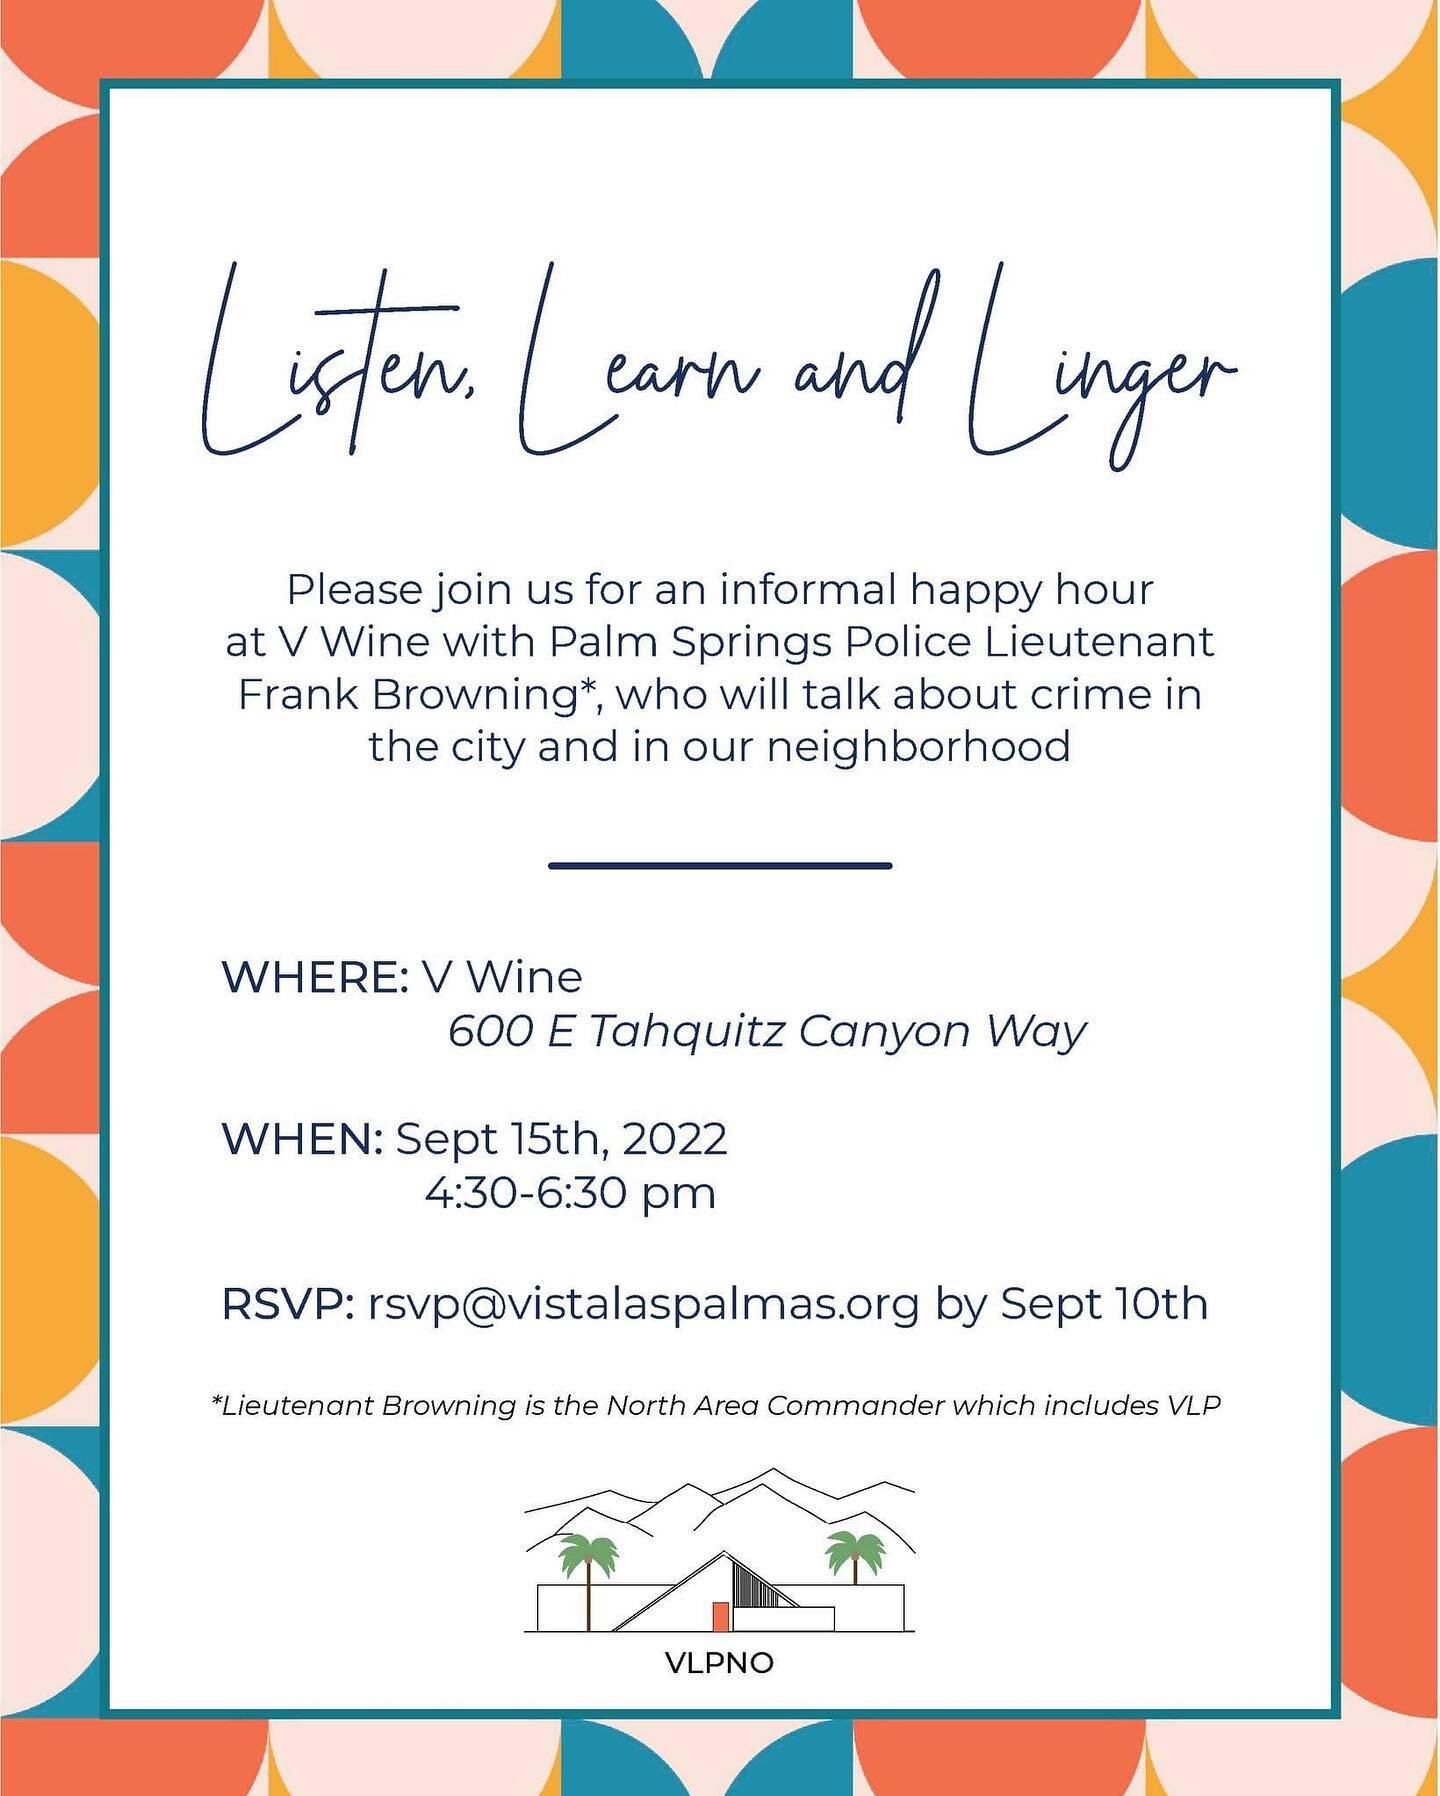 Vista Las Palmas neighbors! Please join us for our next neighborhood social - at V Wine. Our special guest will be @palmspringspd Lieutenant Frank Browning. We hope to see you there! #vlpno #vlpnowhereelse #vistalaspalmas